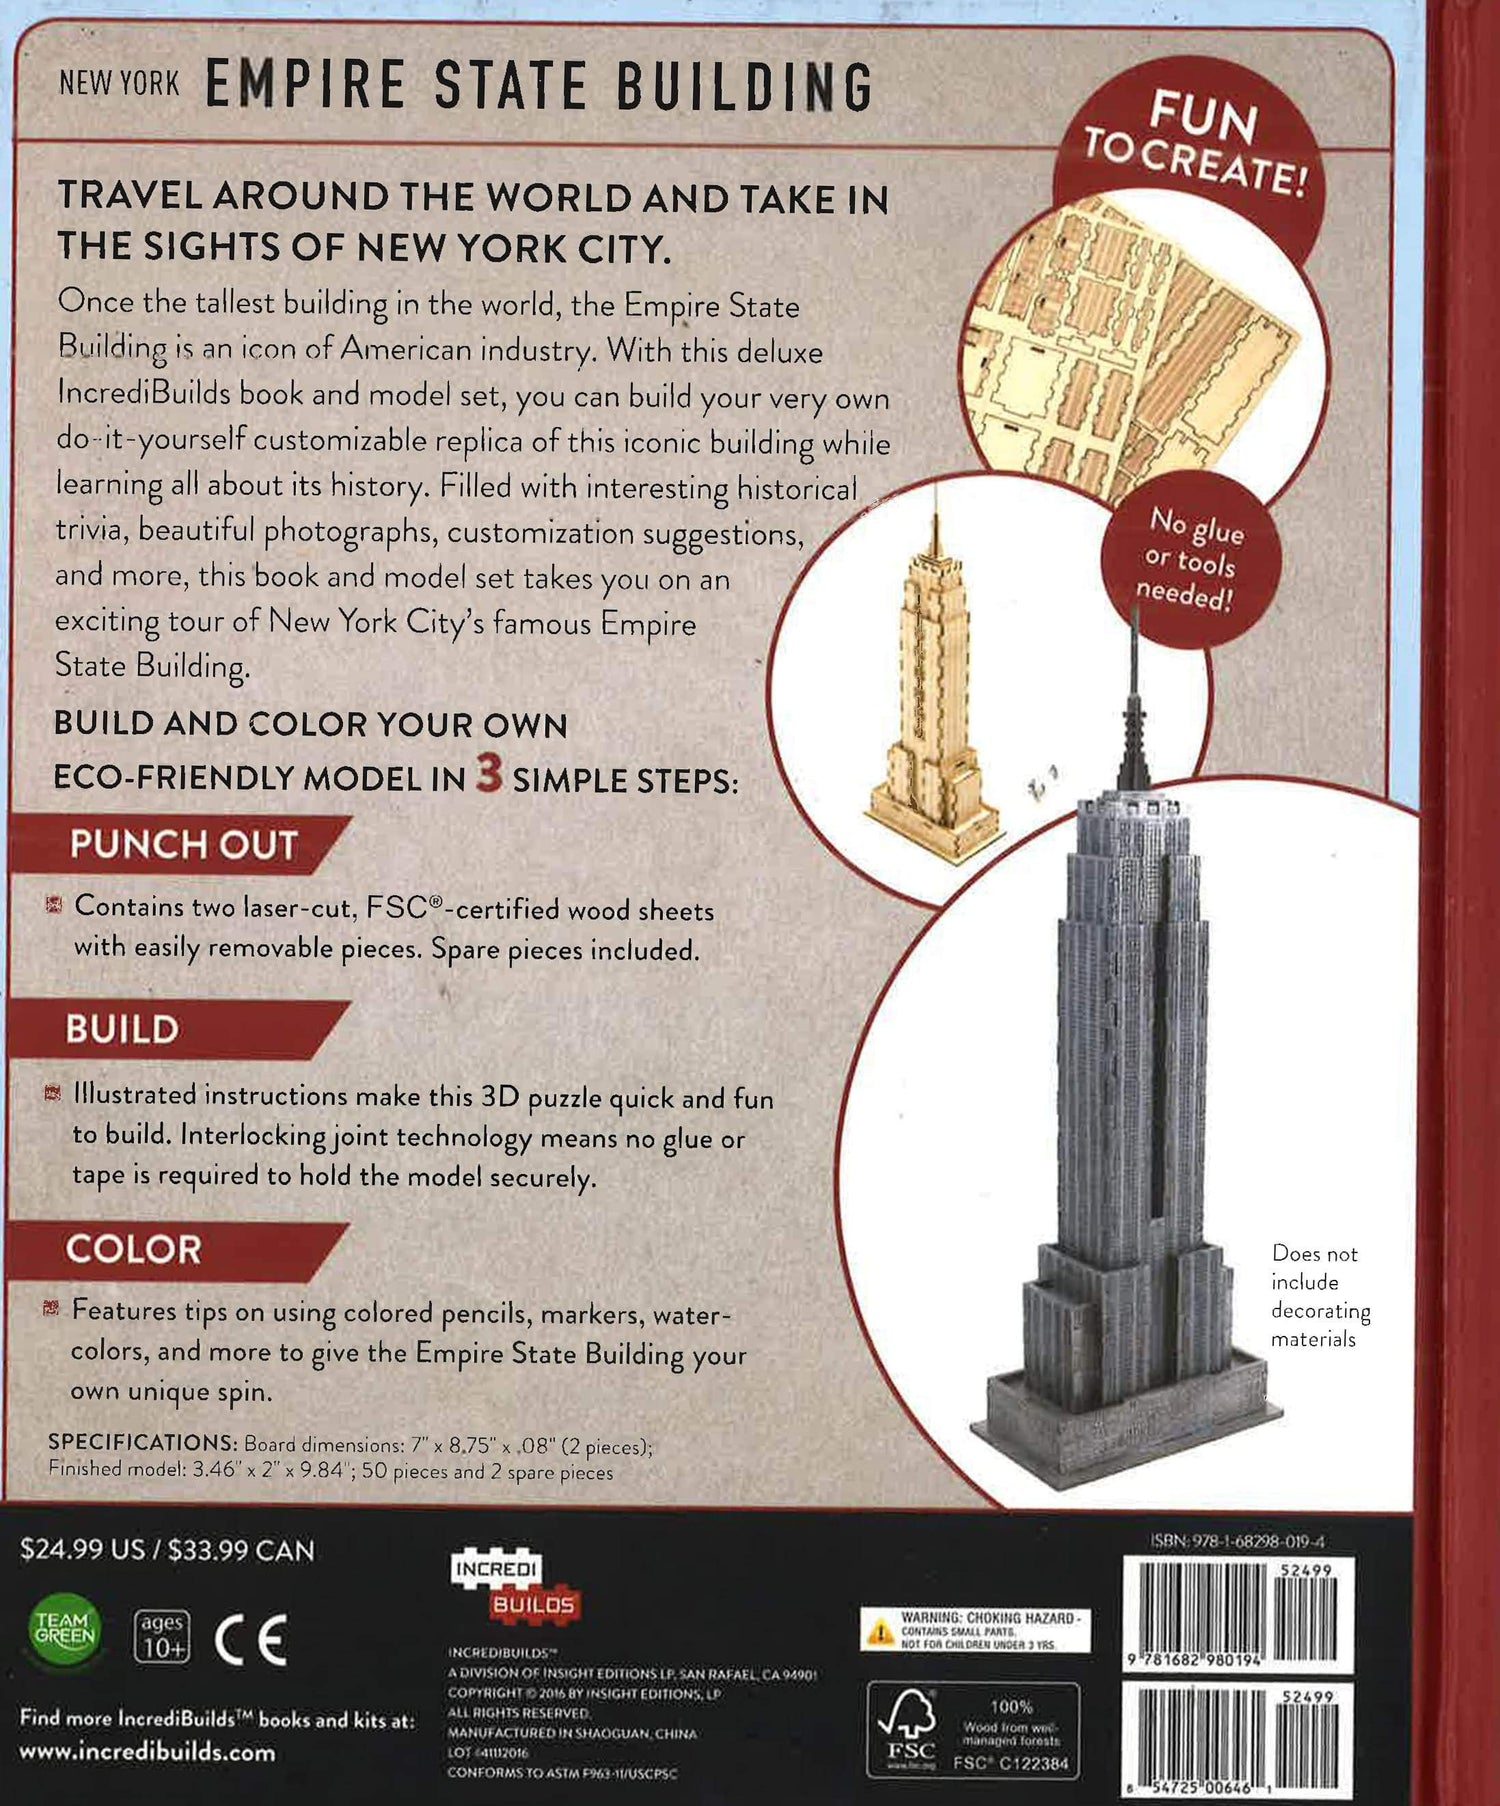 New York Empire State Building Deluxe Book And Model Set (Incredibuilds)